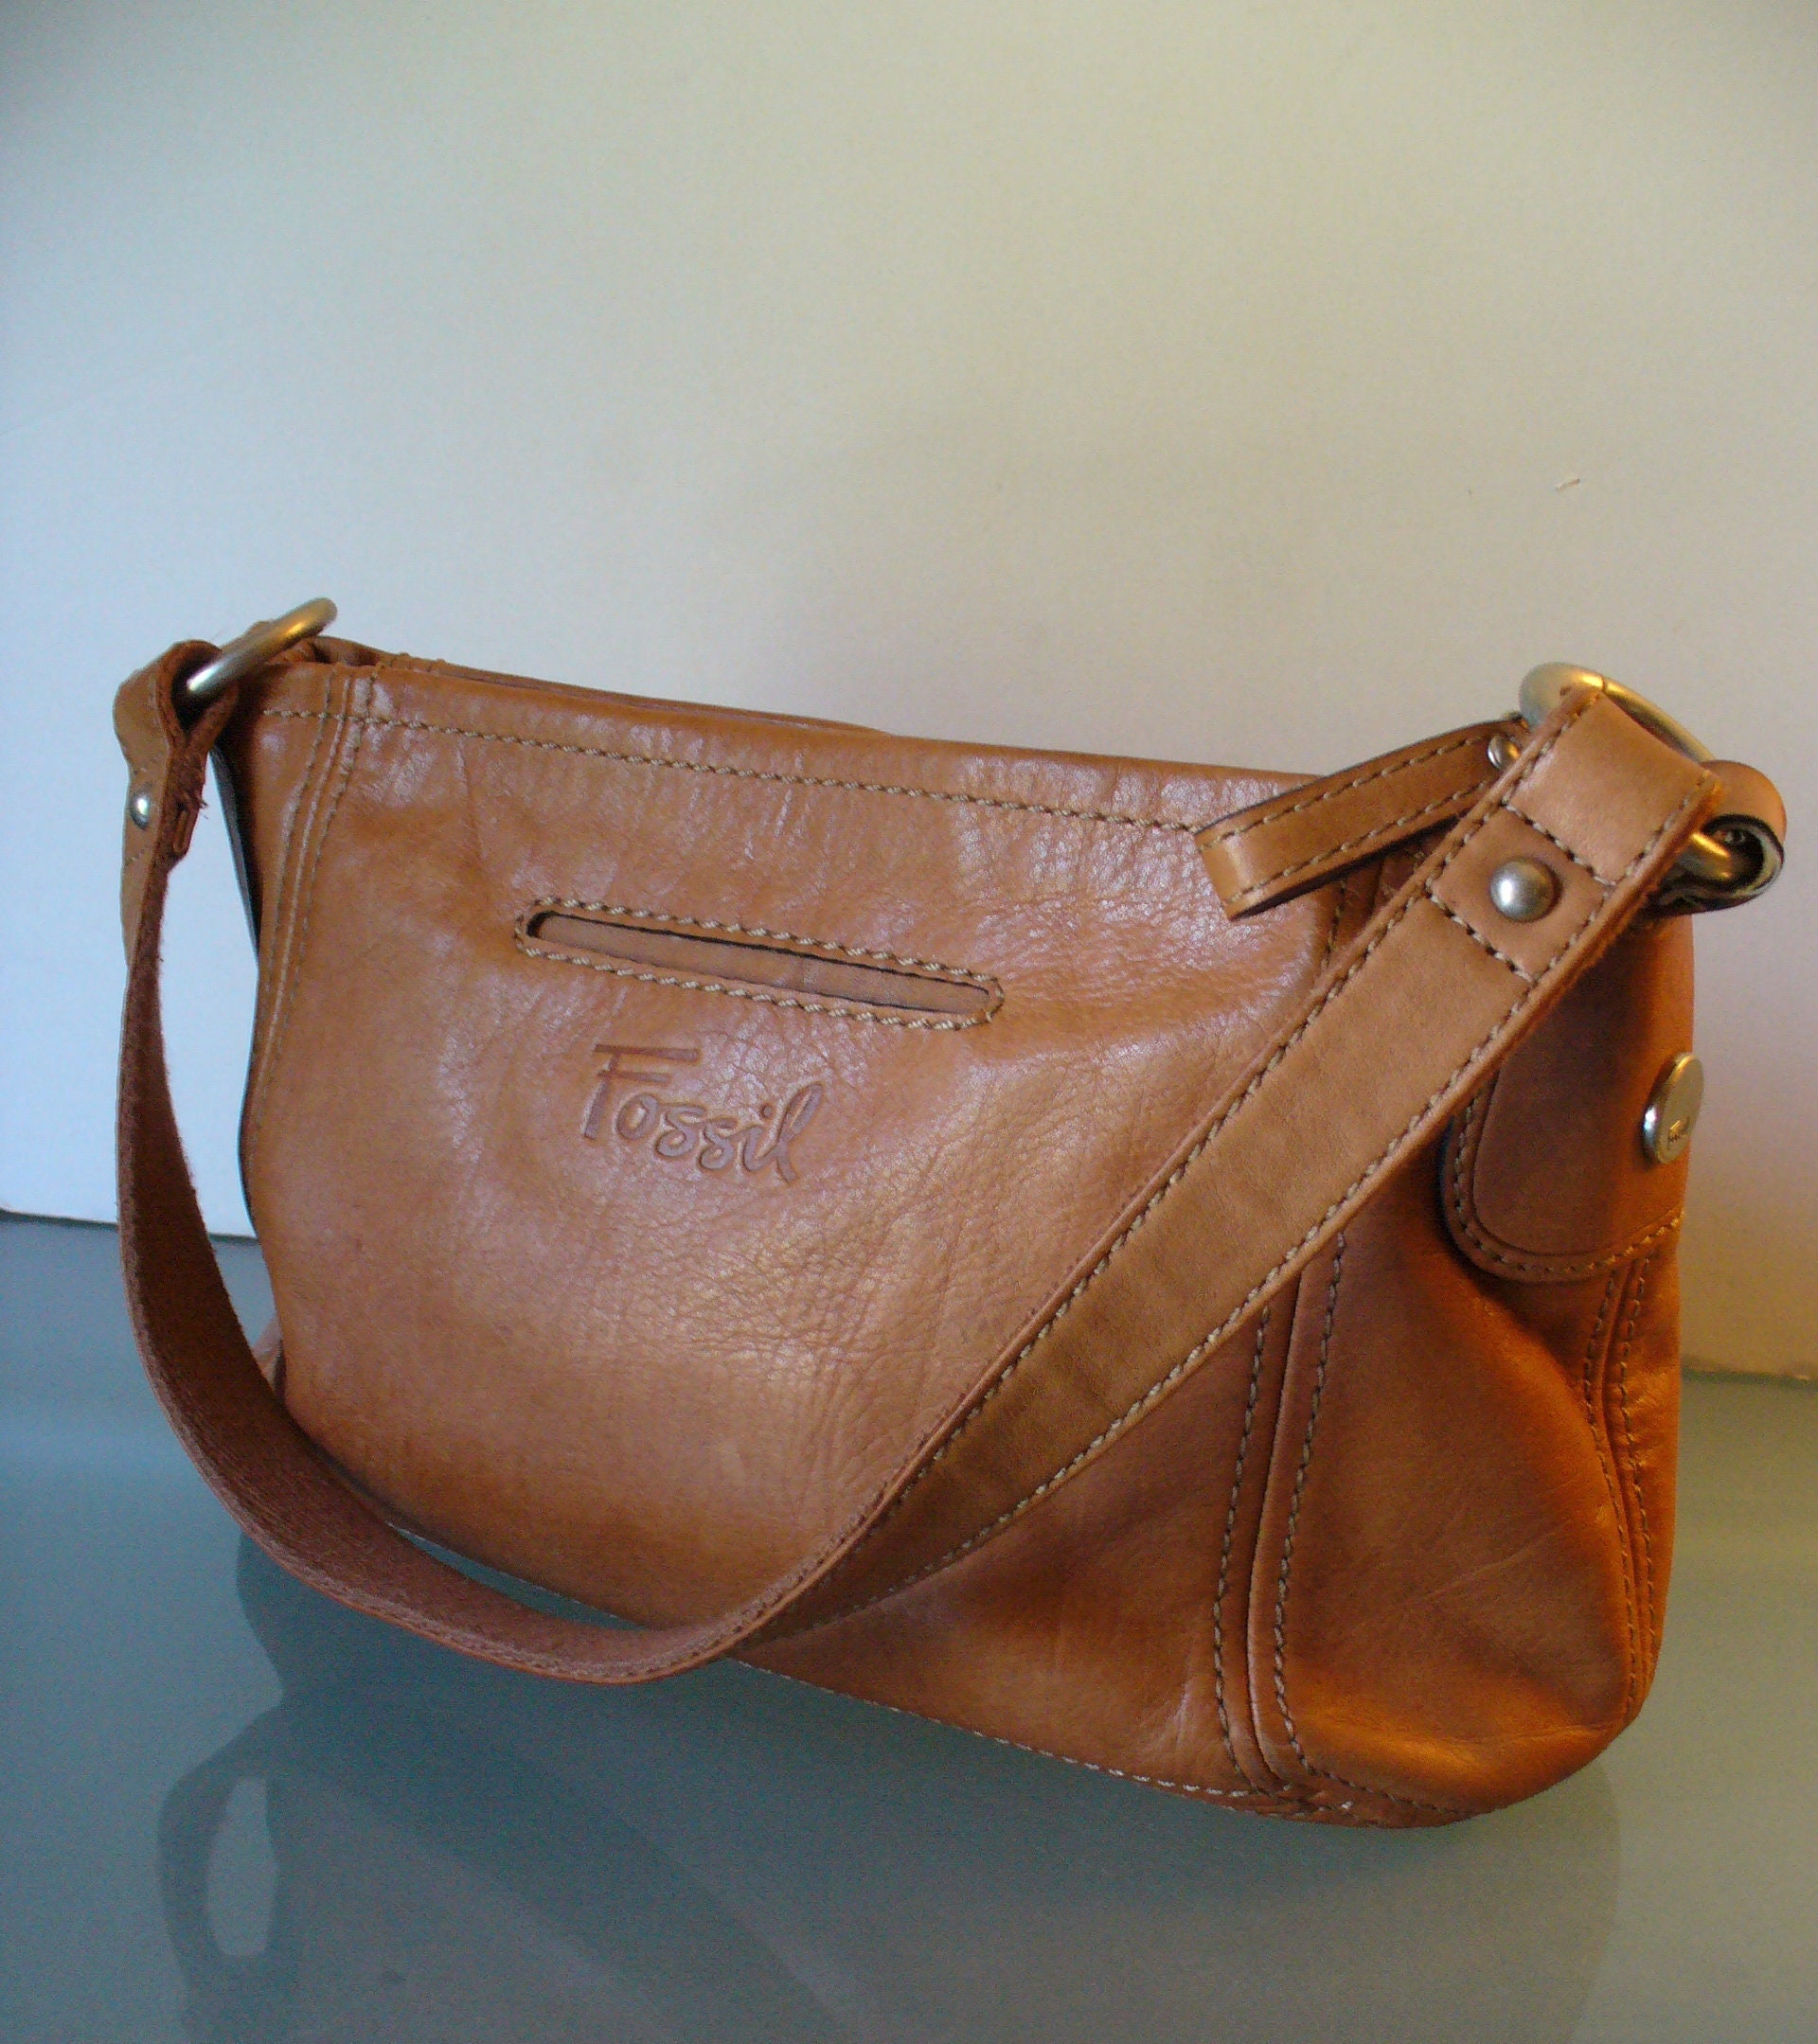 Vintage Fossil Brown Leather Crossbody Satchel Purse